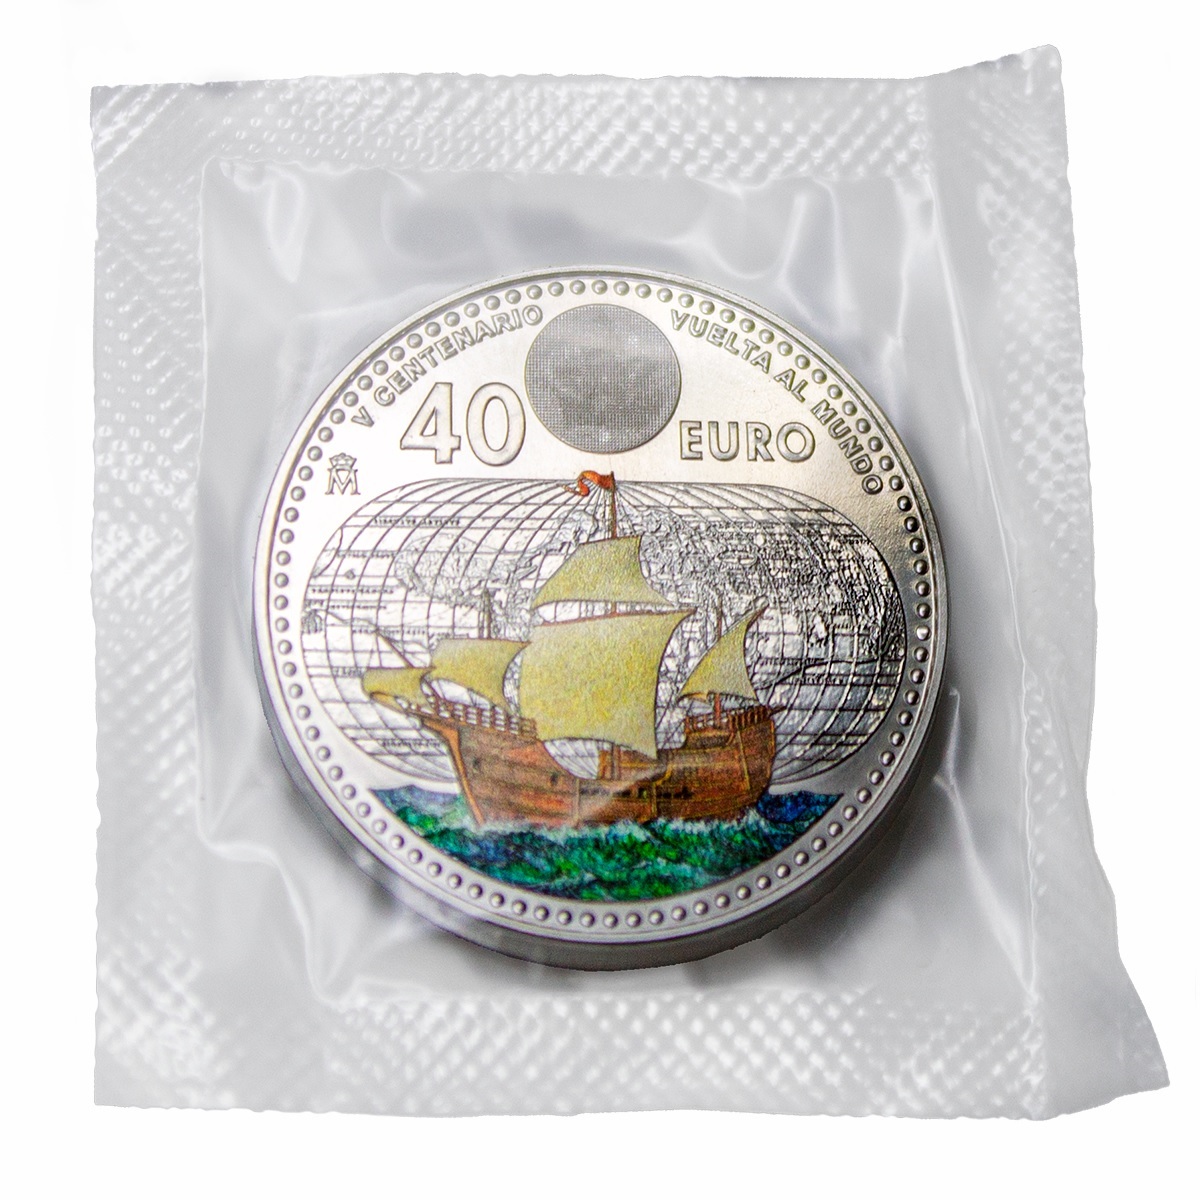 (EUR05.Unc.2022.32920022) 40 € Spain 2022 Ag - 500th anniversary of the round-the-world voyage (wrapper) (zoom)